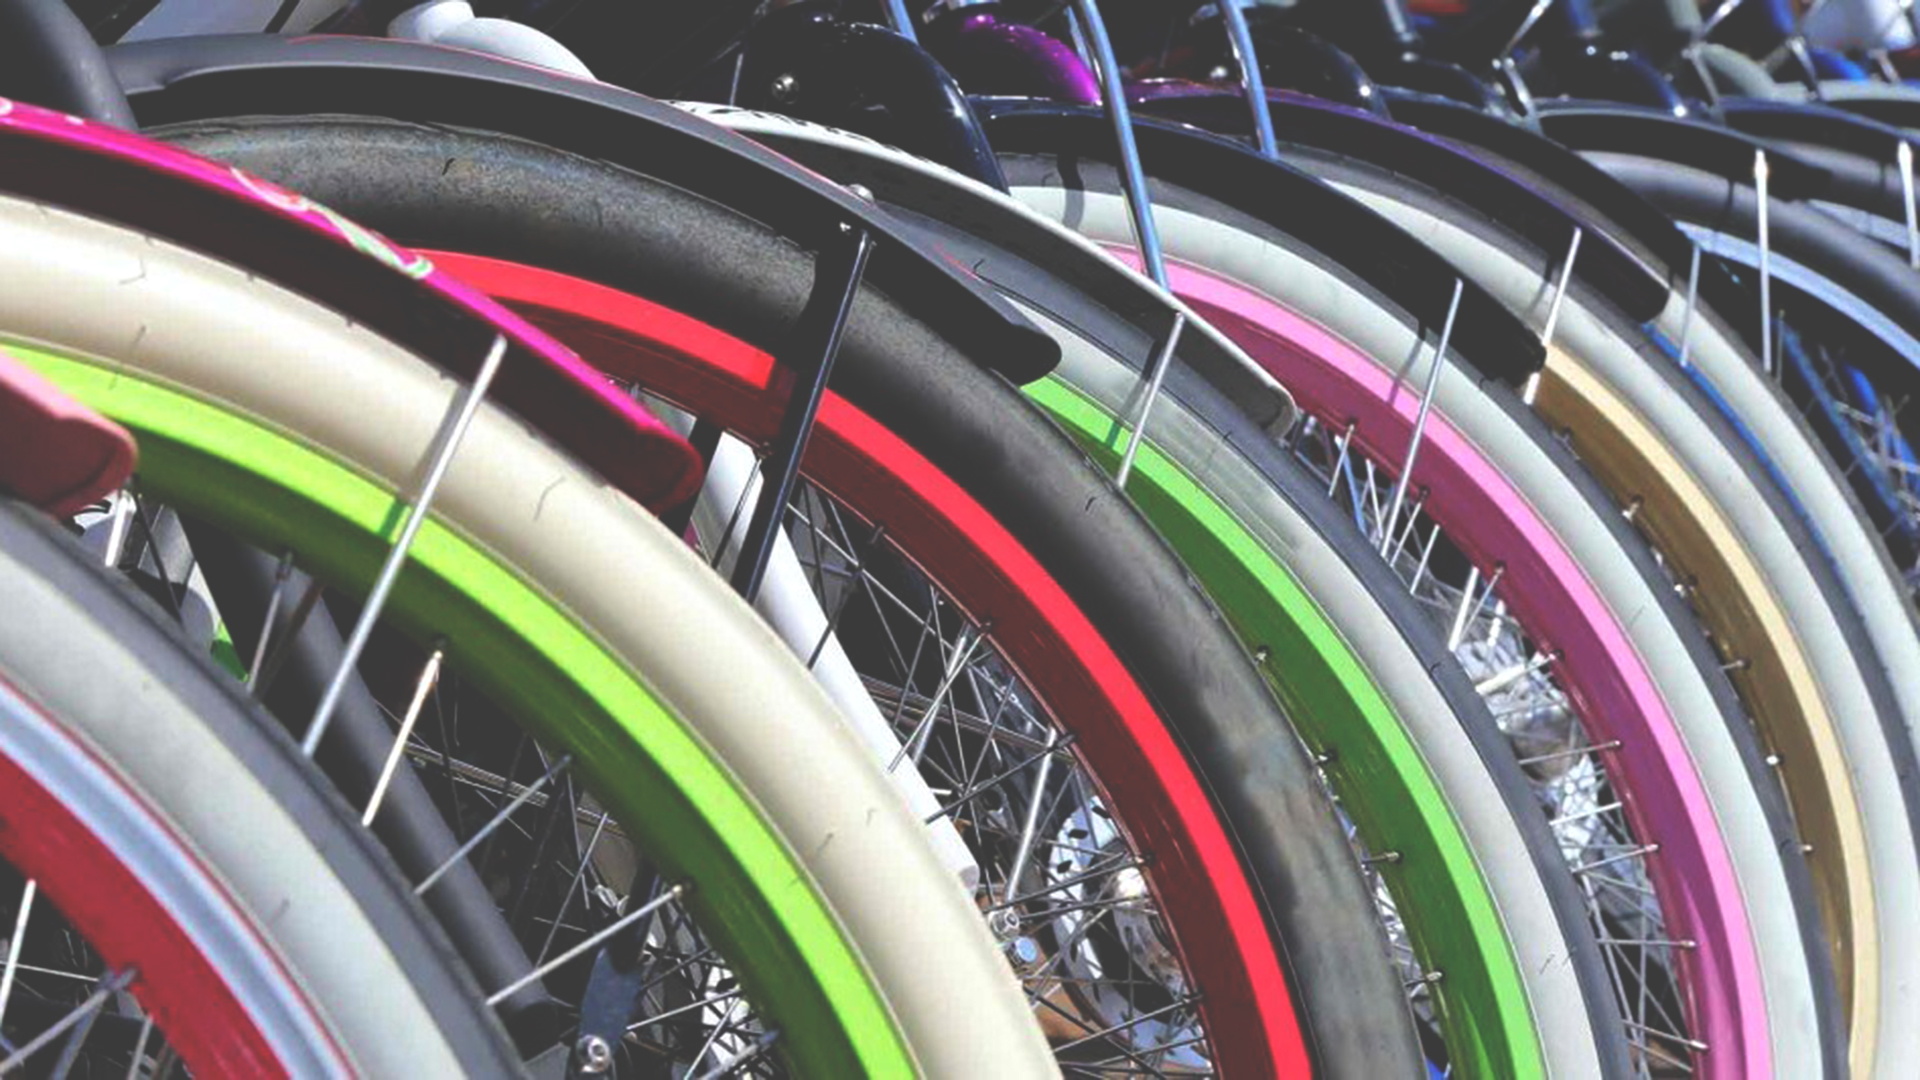 Cruiser bicycle wheels in a line